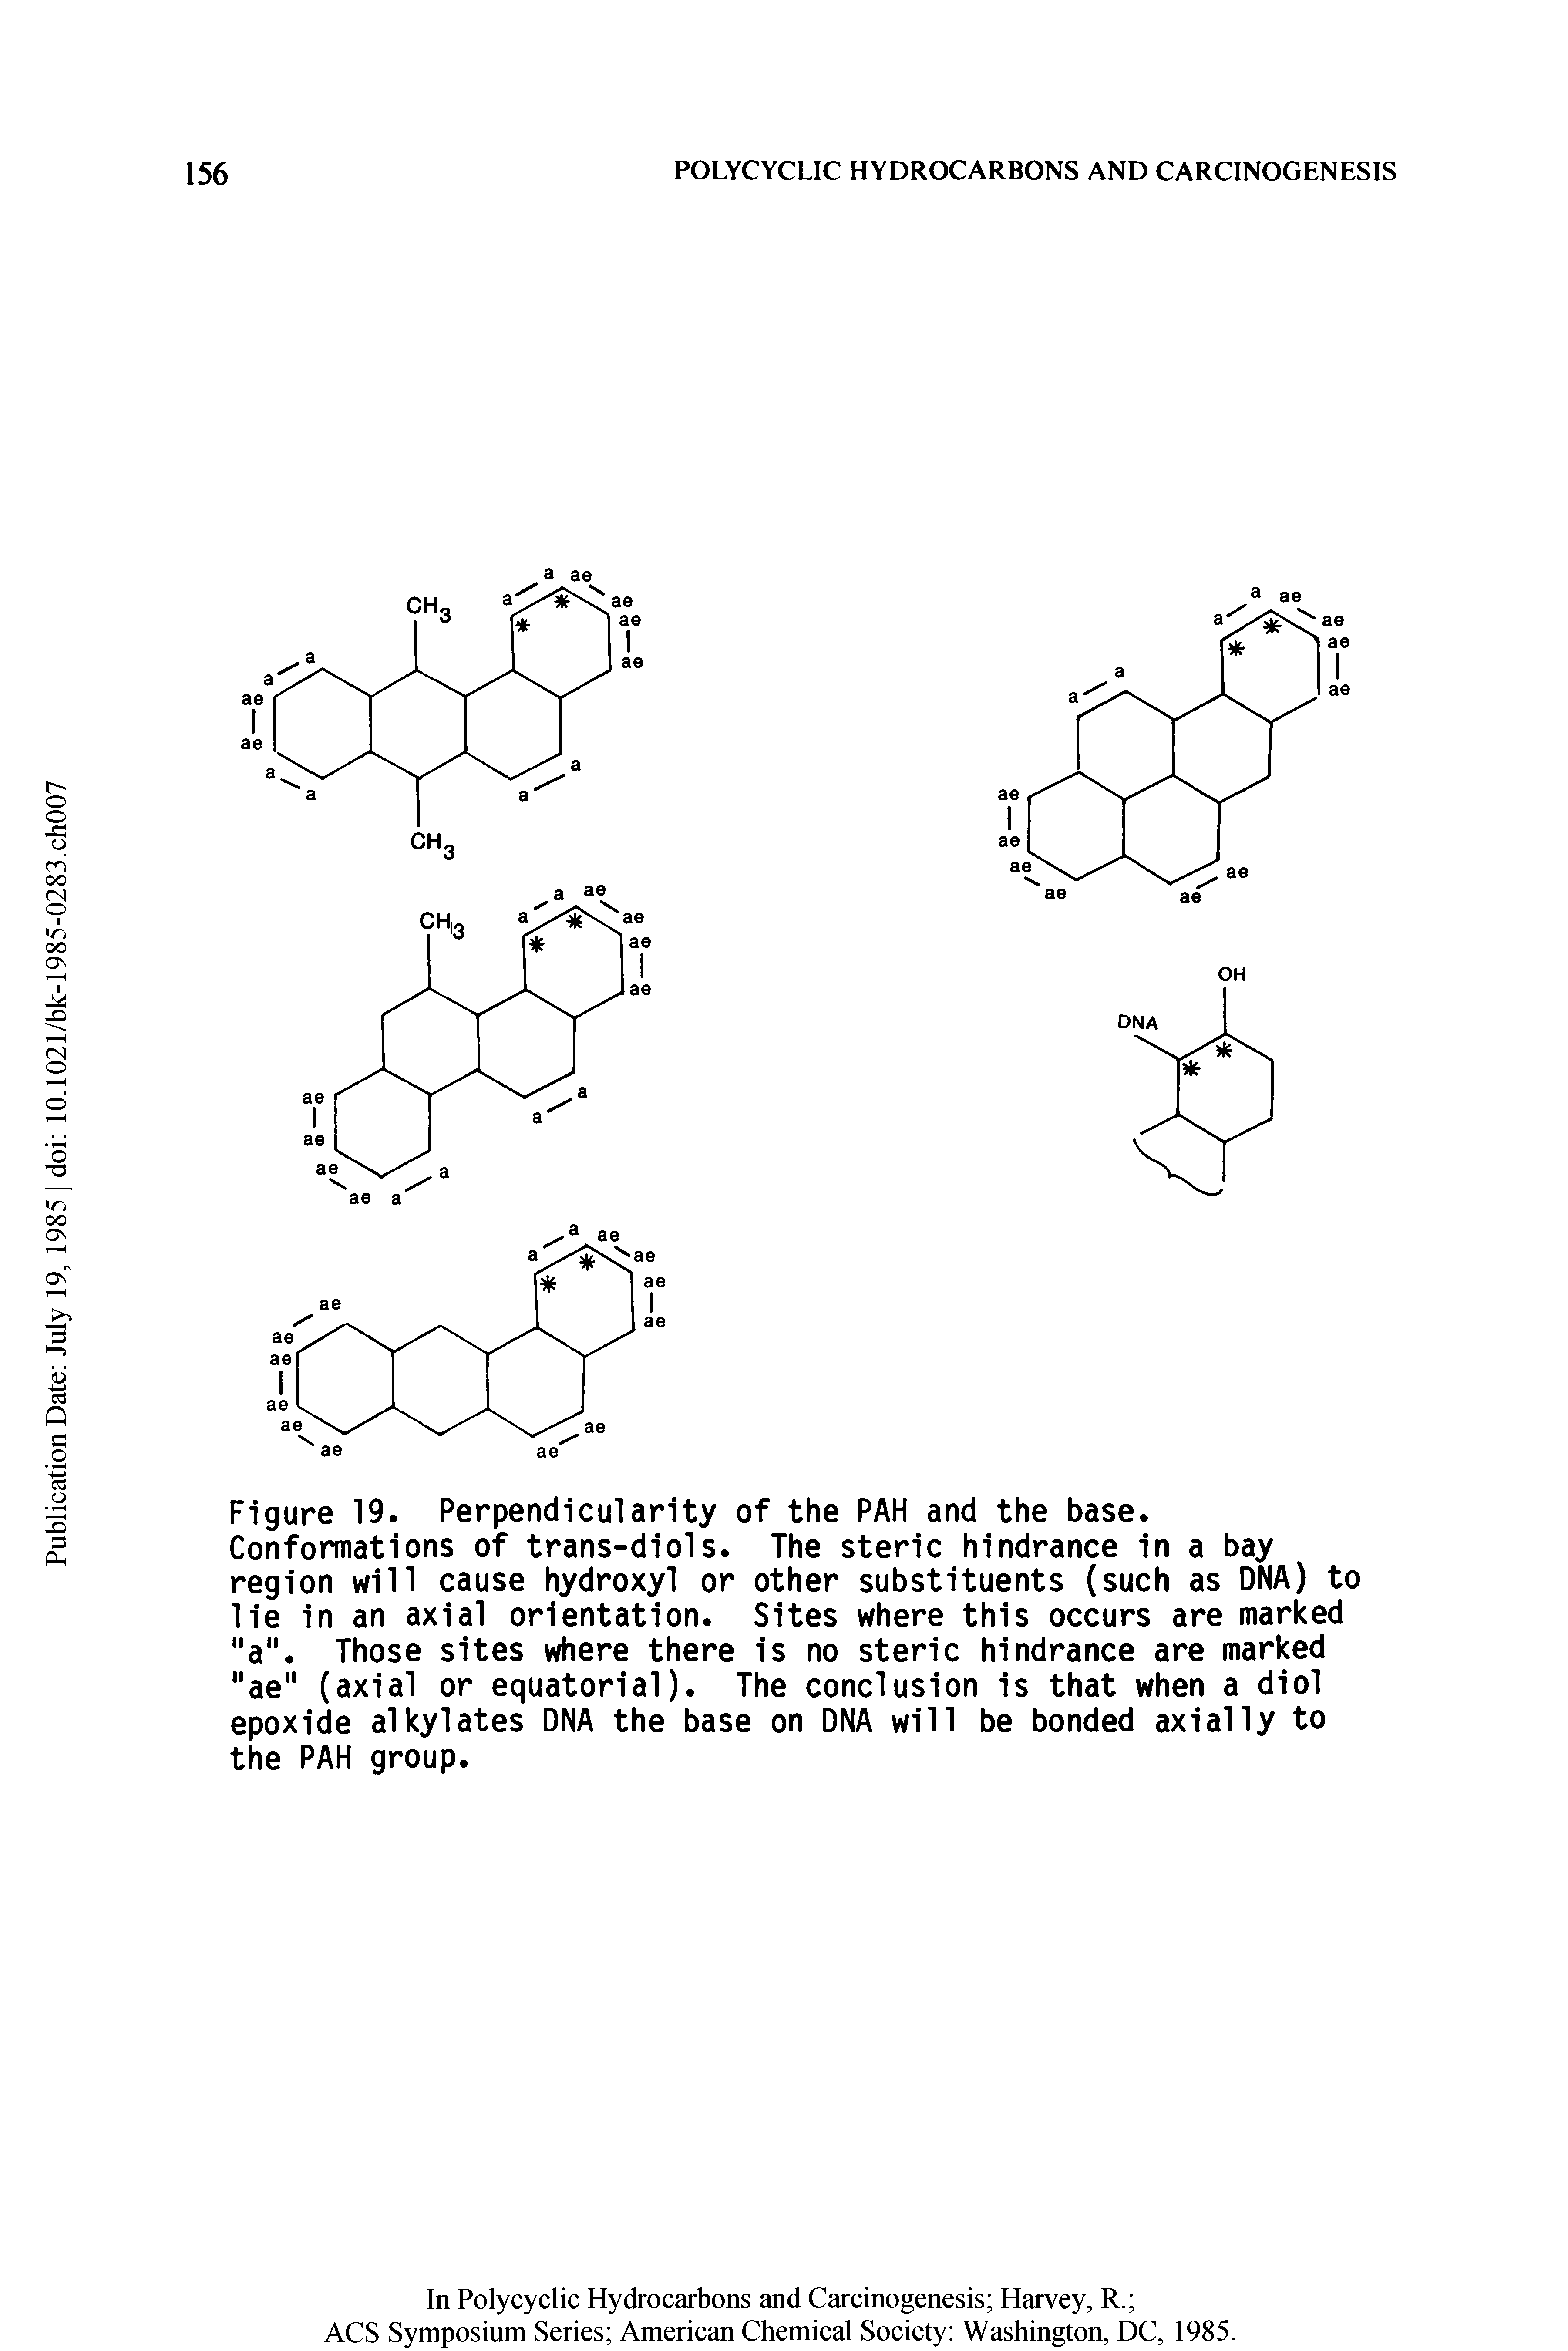 Figure 19. Perpendicularity of the PAH and the base. Conformations of trans-diols. The steric hindrance in a bay region will cause hydroxyl or other substituents (such as DNA) to lie in an axial orientation. Sites where this occurs are marked "a". Those sites where there is no steric hindrance are marked "ae" (axial or equatorial). The conclusion is that when a diol epoxide alkylates DNA the base on DNA will be bonded axially to the PAH group.